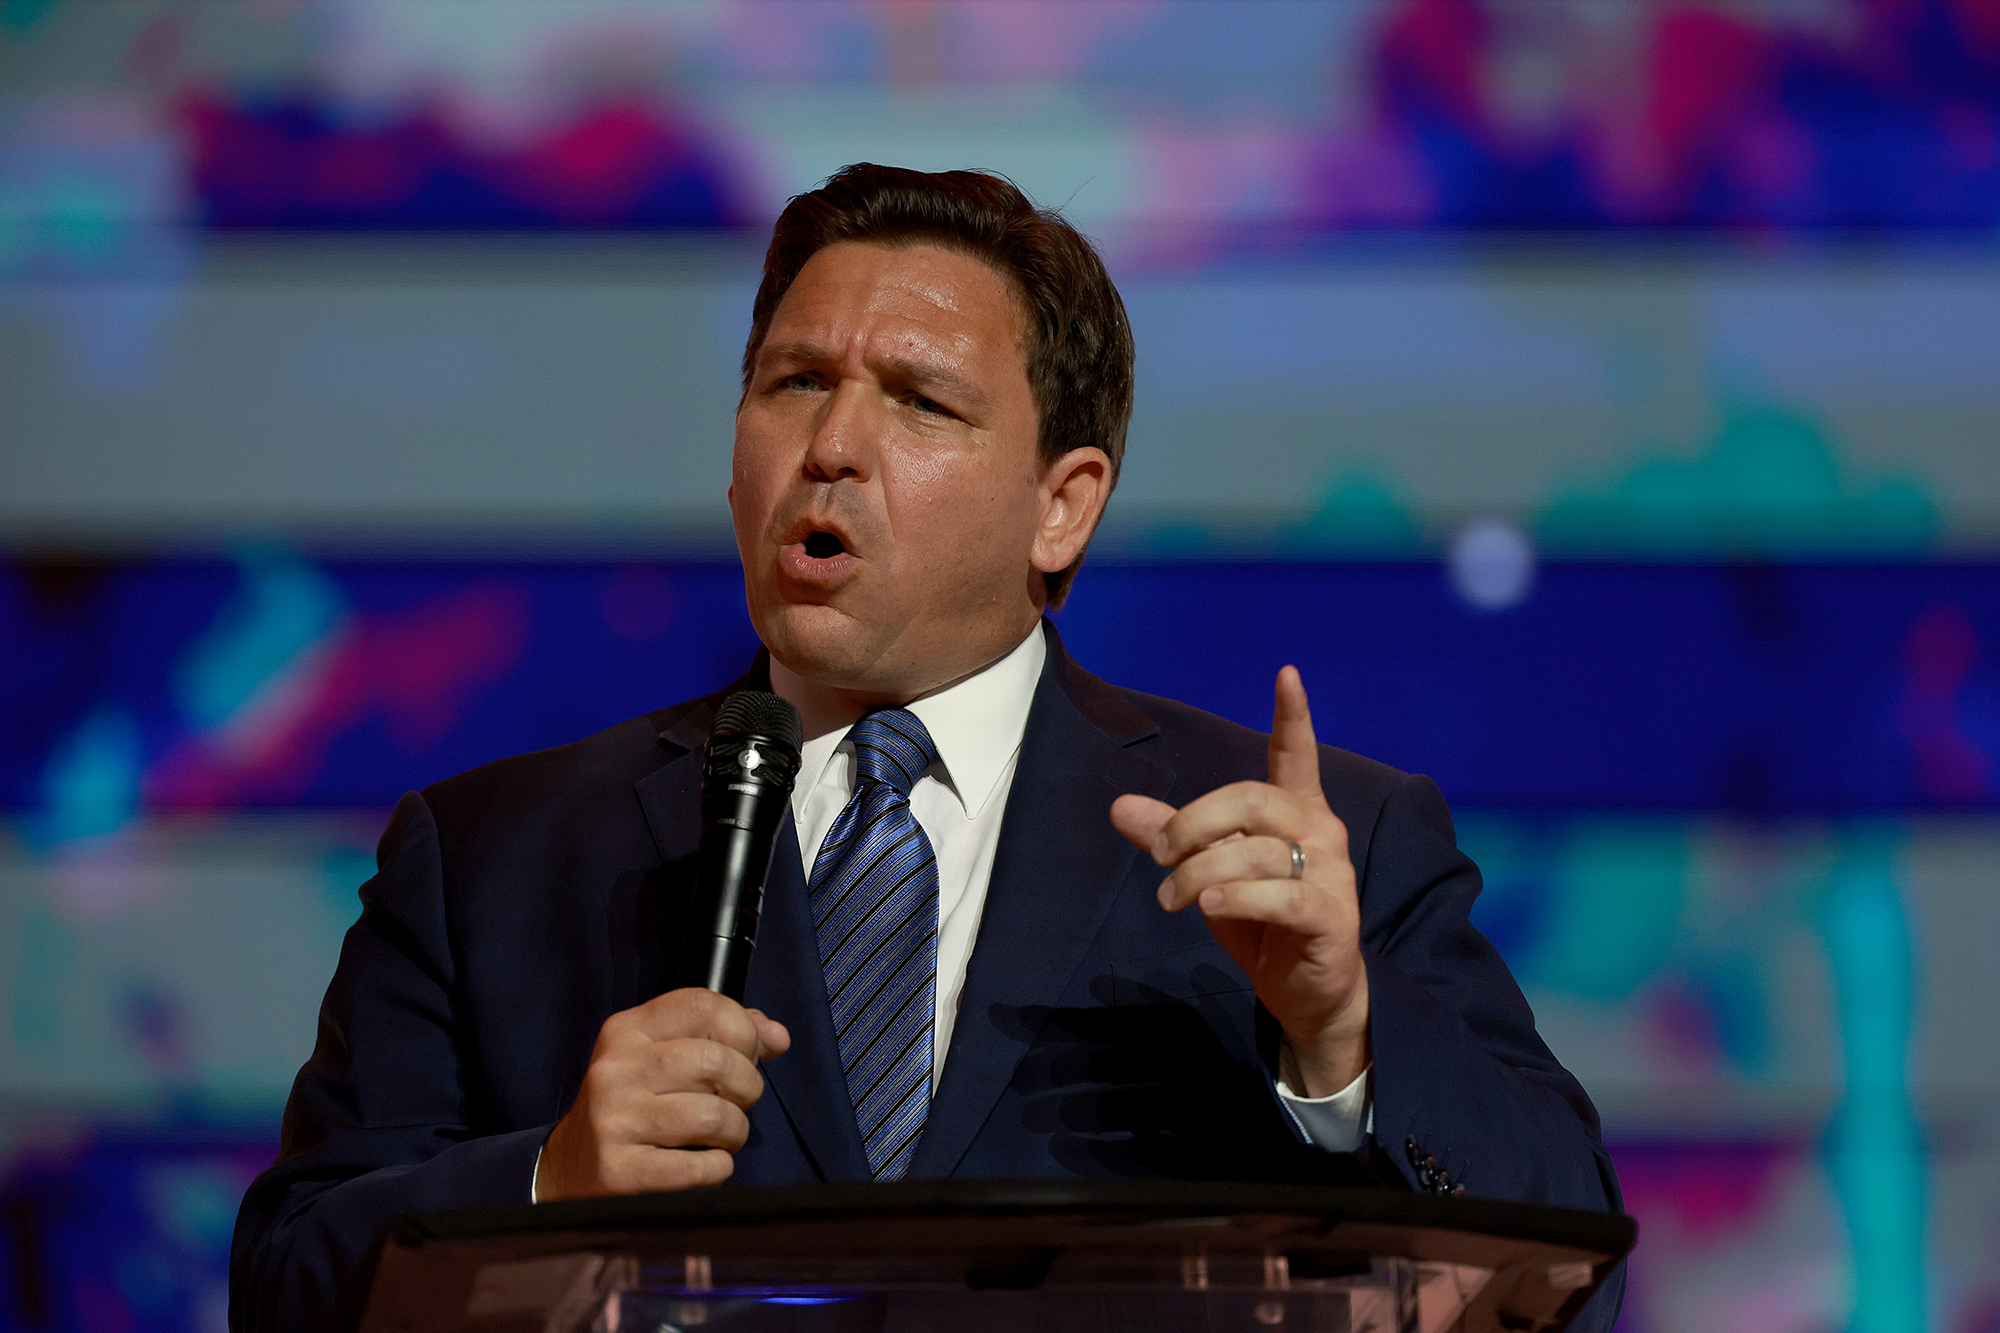 Florida Gov. Ron DeSantis speaks during the Turning Point USA Student Action Summit held at the Tampa Convention Center on July 22, 2022 in Tampa, Florida.